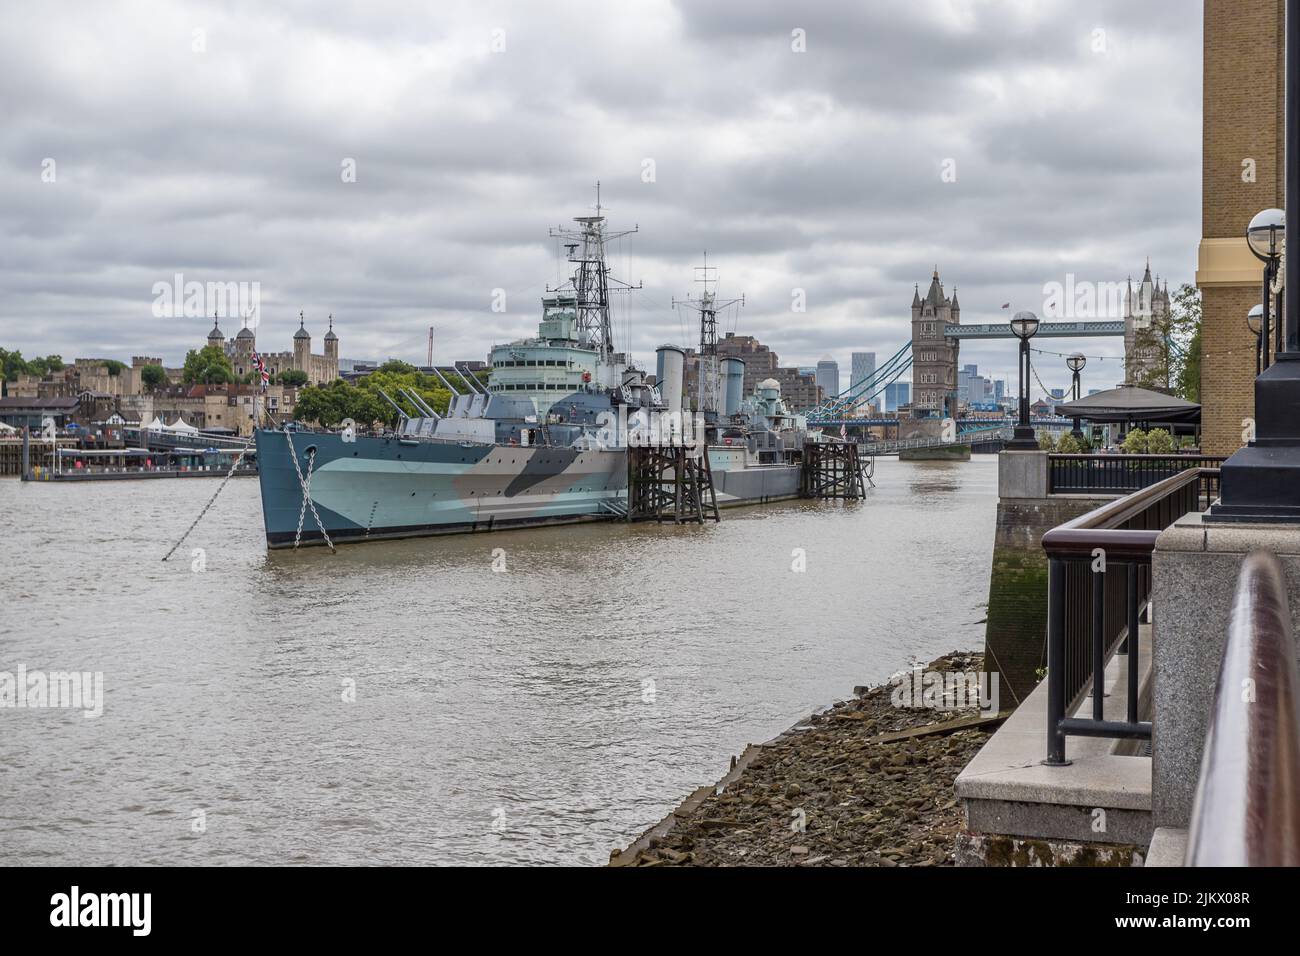 HMS Belfast captured from the Queens Walk in London in August 2022.  The Tower of London, Tower Bridge and Canary Wharf can be seen behind the boat mu Stock Photo